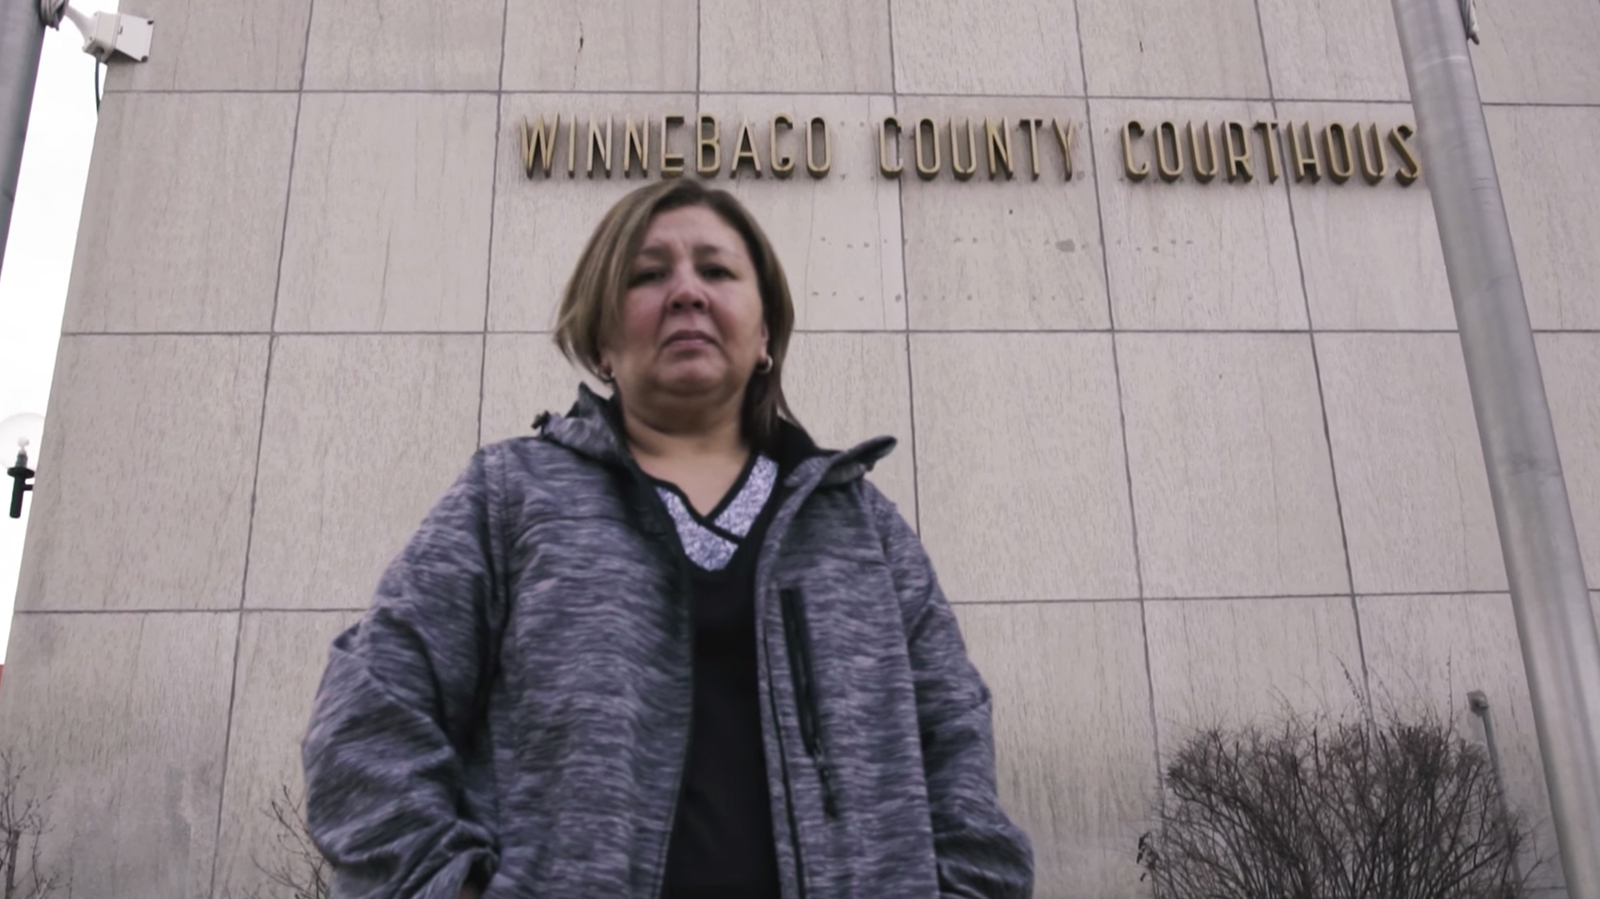 Nurse Sandra Rojas poses in front of the Winnebago County Courthouse in a video by Alliance Defending Freedom. Video screengrab